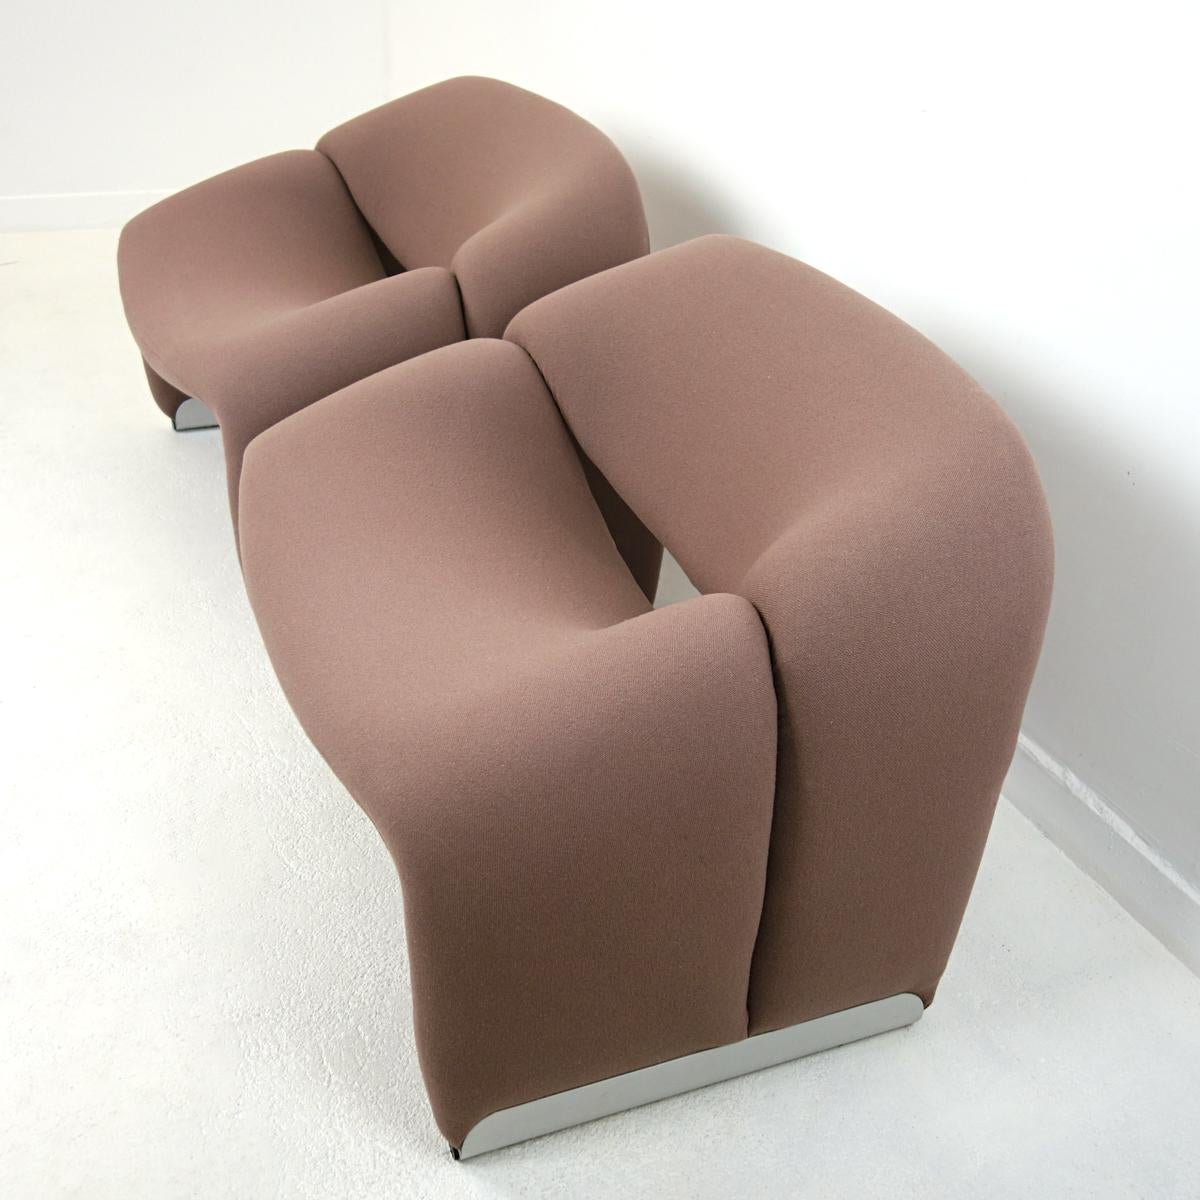 The groovy chair, or F598, was designed in 1973 by France’s top designer Pierre Paulin for Holland’s most Avant garde furniture maker Artifort. Their compactness combined with great comfort and of course iconic looks made this chair one of the stars